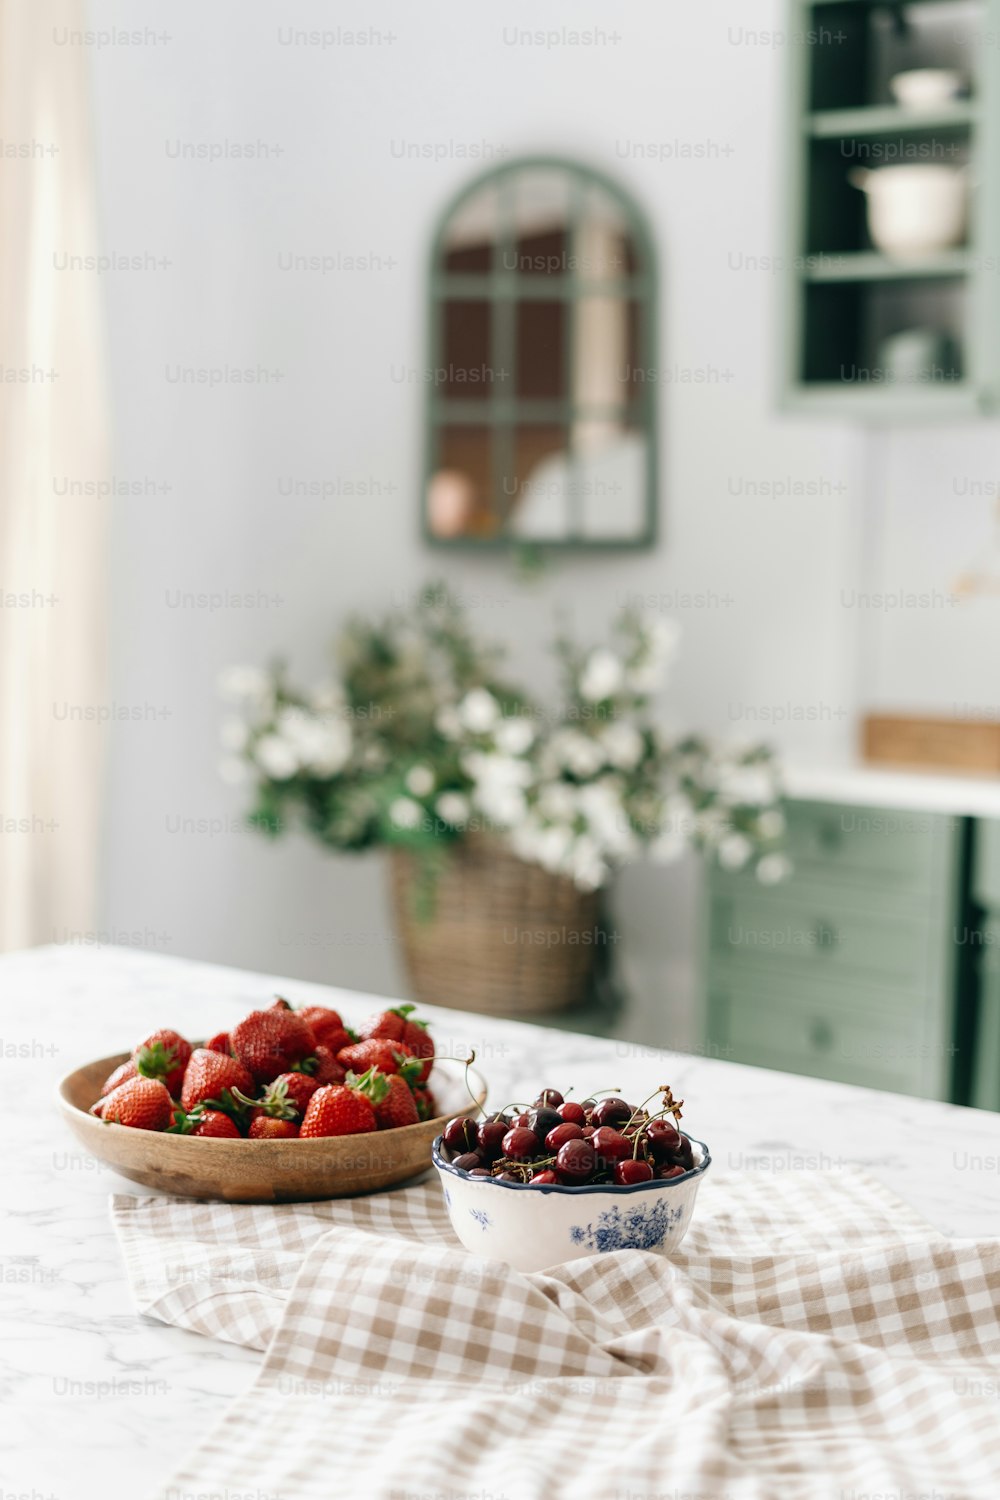 Pair of bowls full of cherries and strawberries on table cloth on kitchen island with marble top,, green vintage furniture in blurred background, woven basket filled with flowers. Vertical shot